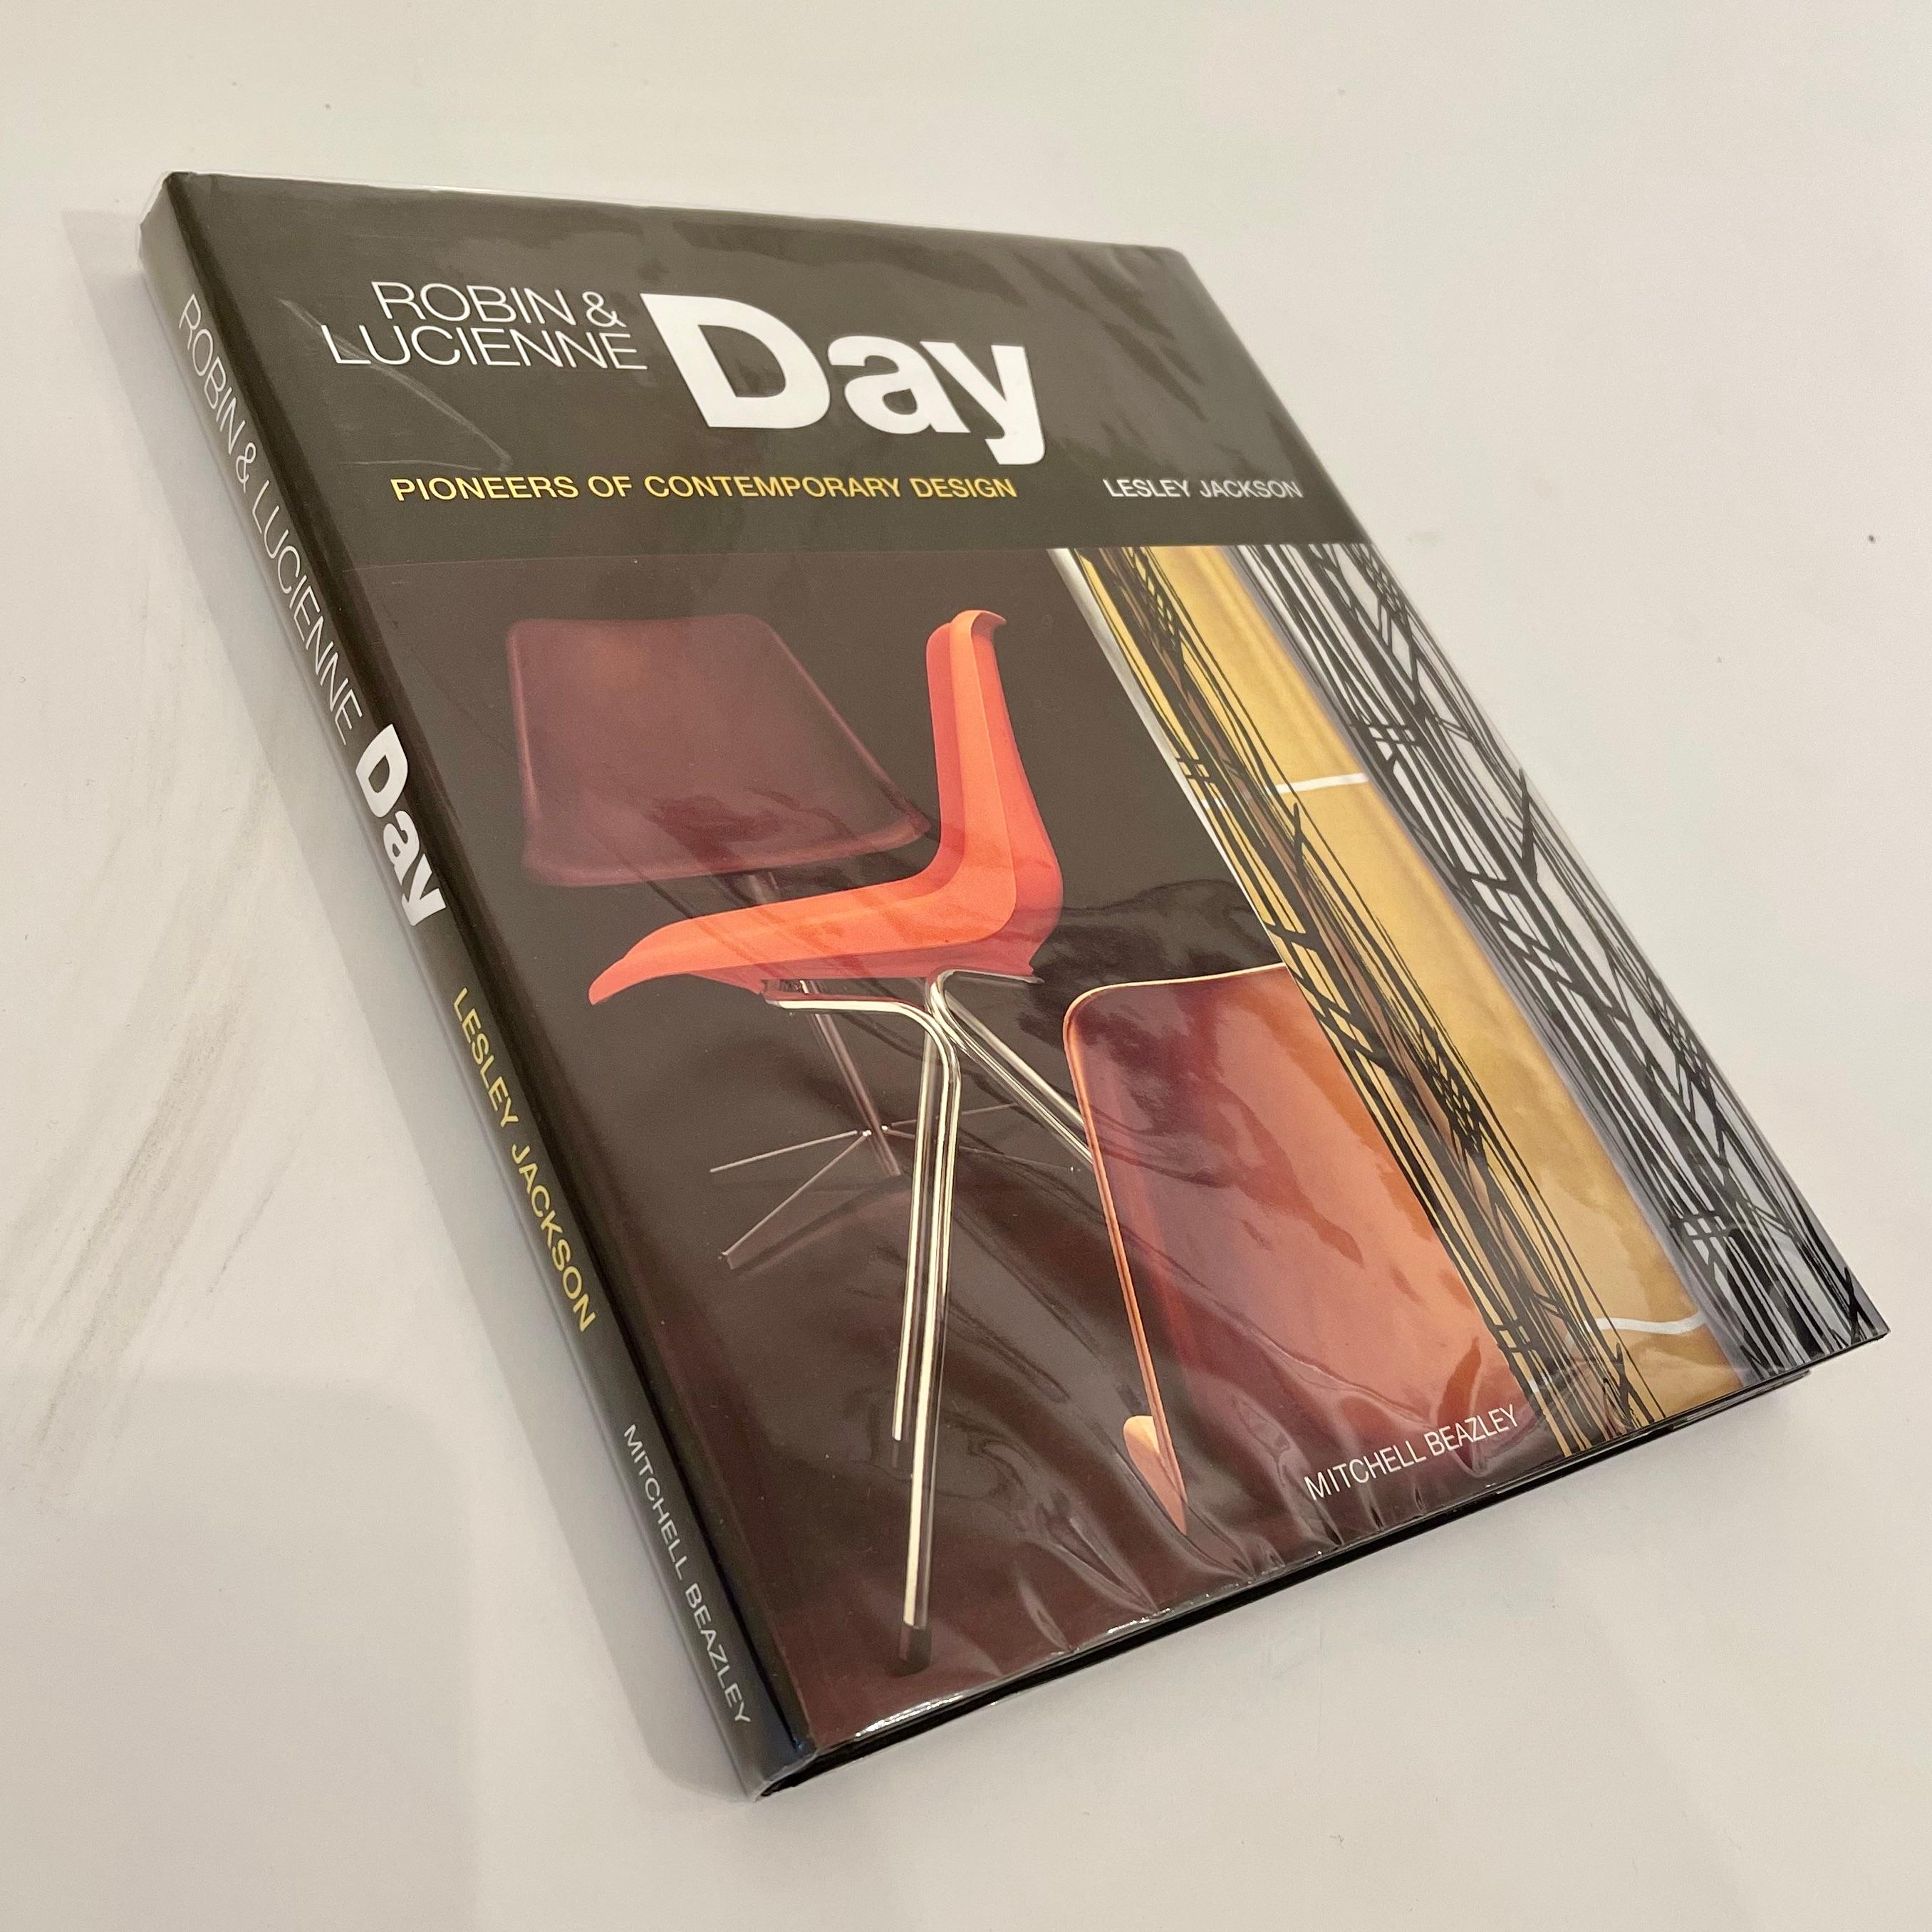 Robin & Lucienne Day: Pioneers of Contemporary Design, Jackson, Beazley, 2001 8